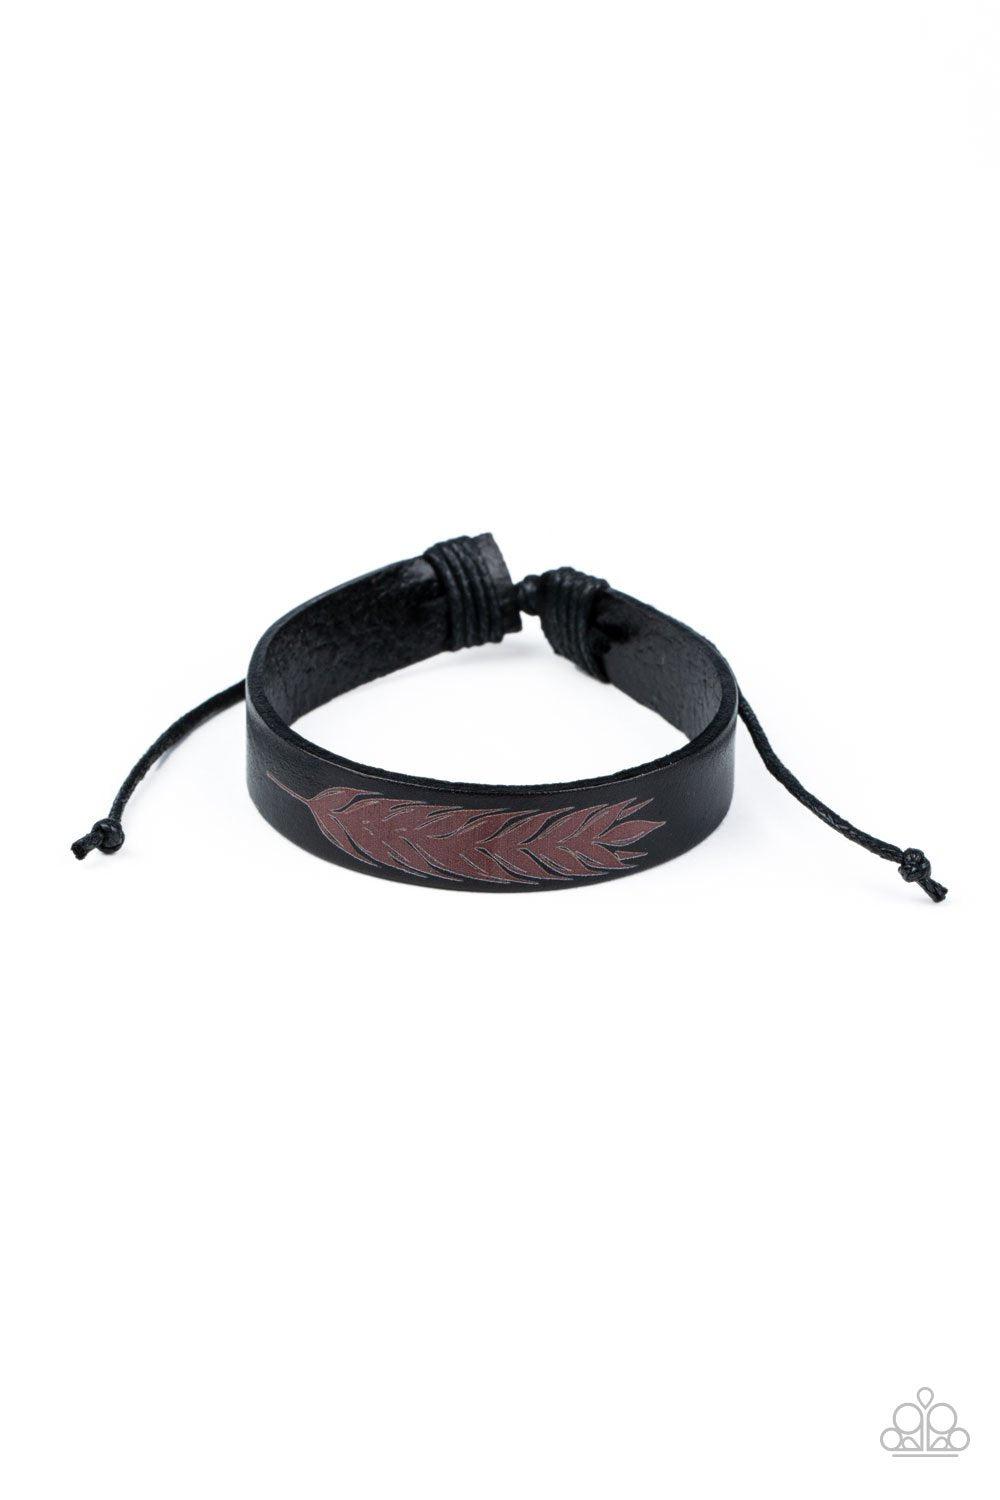 This QUILL All Be Yours Black Leather Feather Urban Knot Bracelet - Paparazzi Accessories-CarasShop.com - $5 Jewelry by Cara Jewels